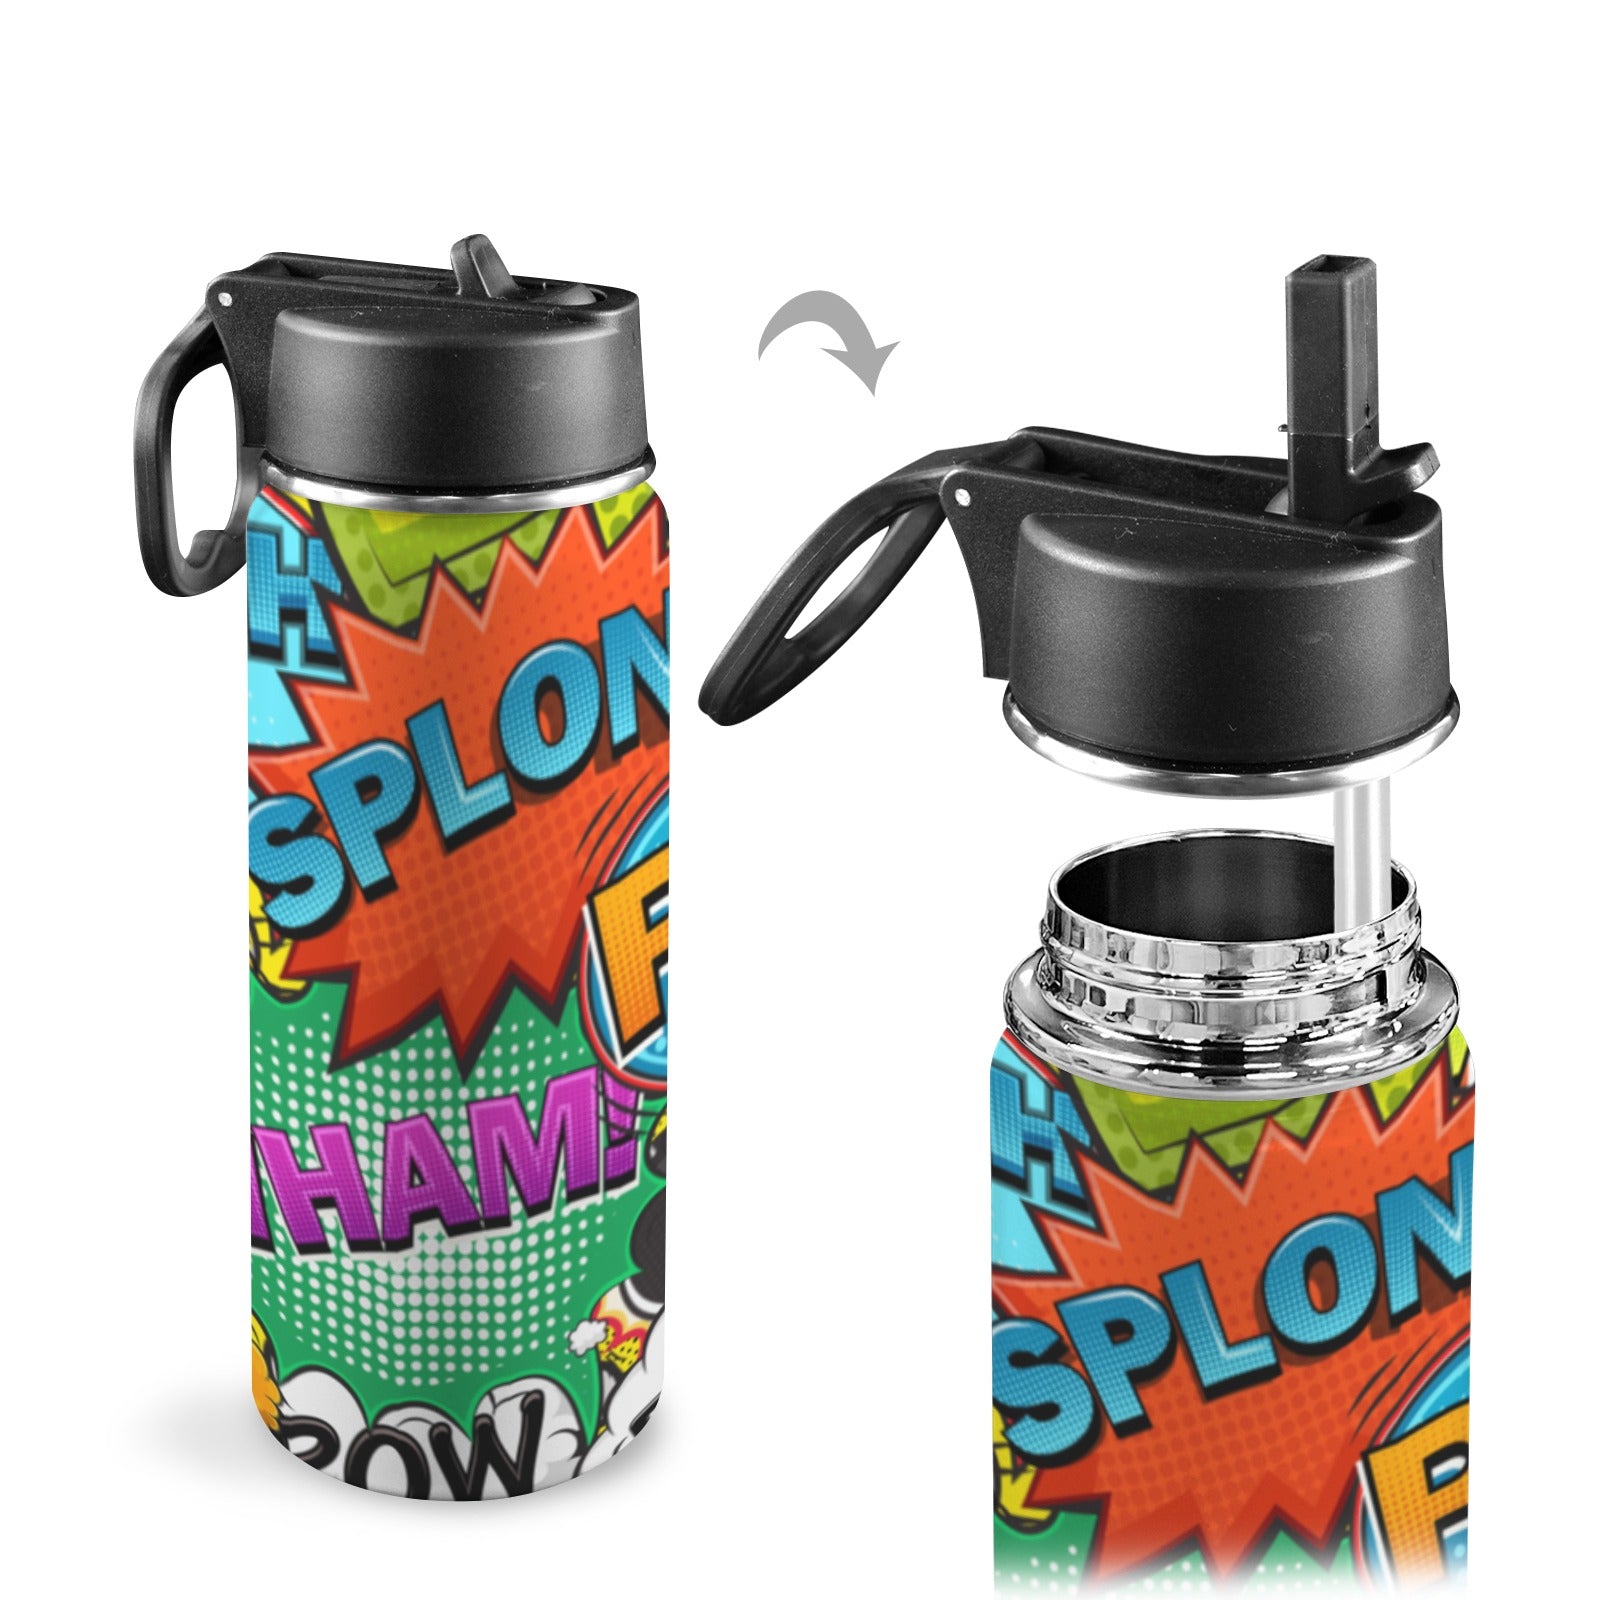 Comic Book 2 - Insulated Water Bottle with Straw Lid (18oz) Insulated Water Bottle with Swing Handle